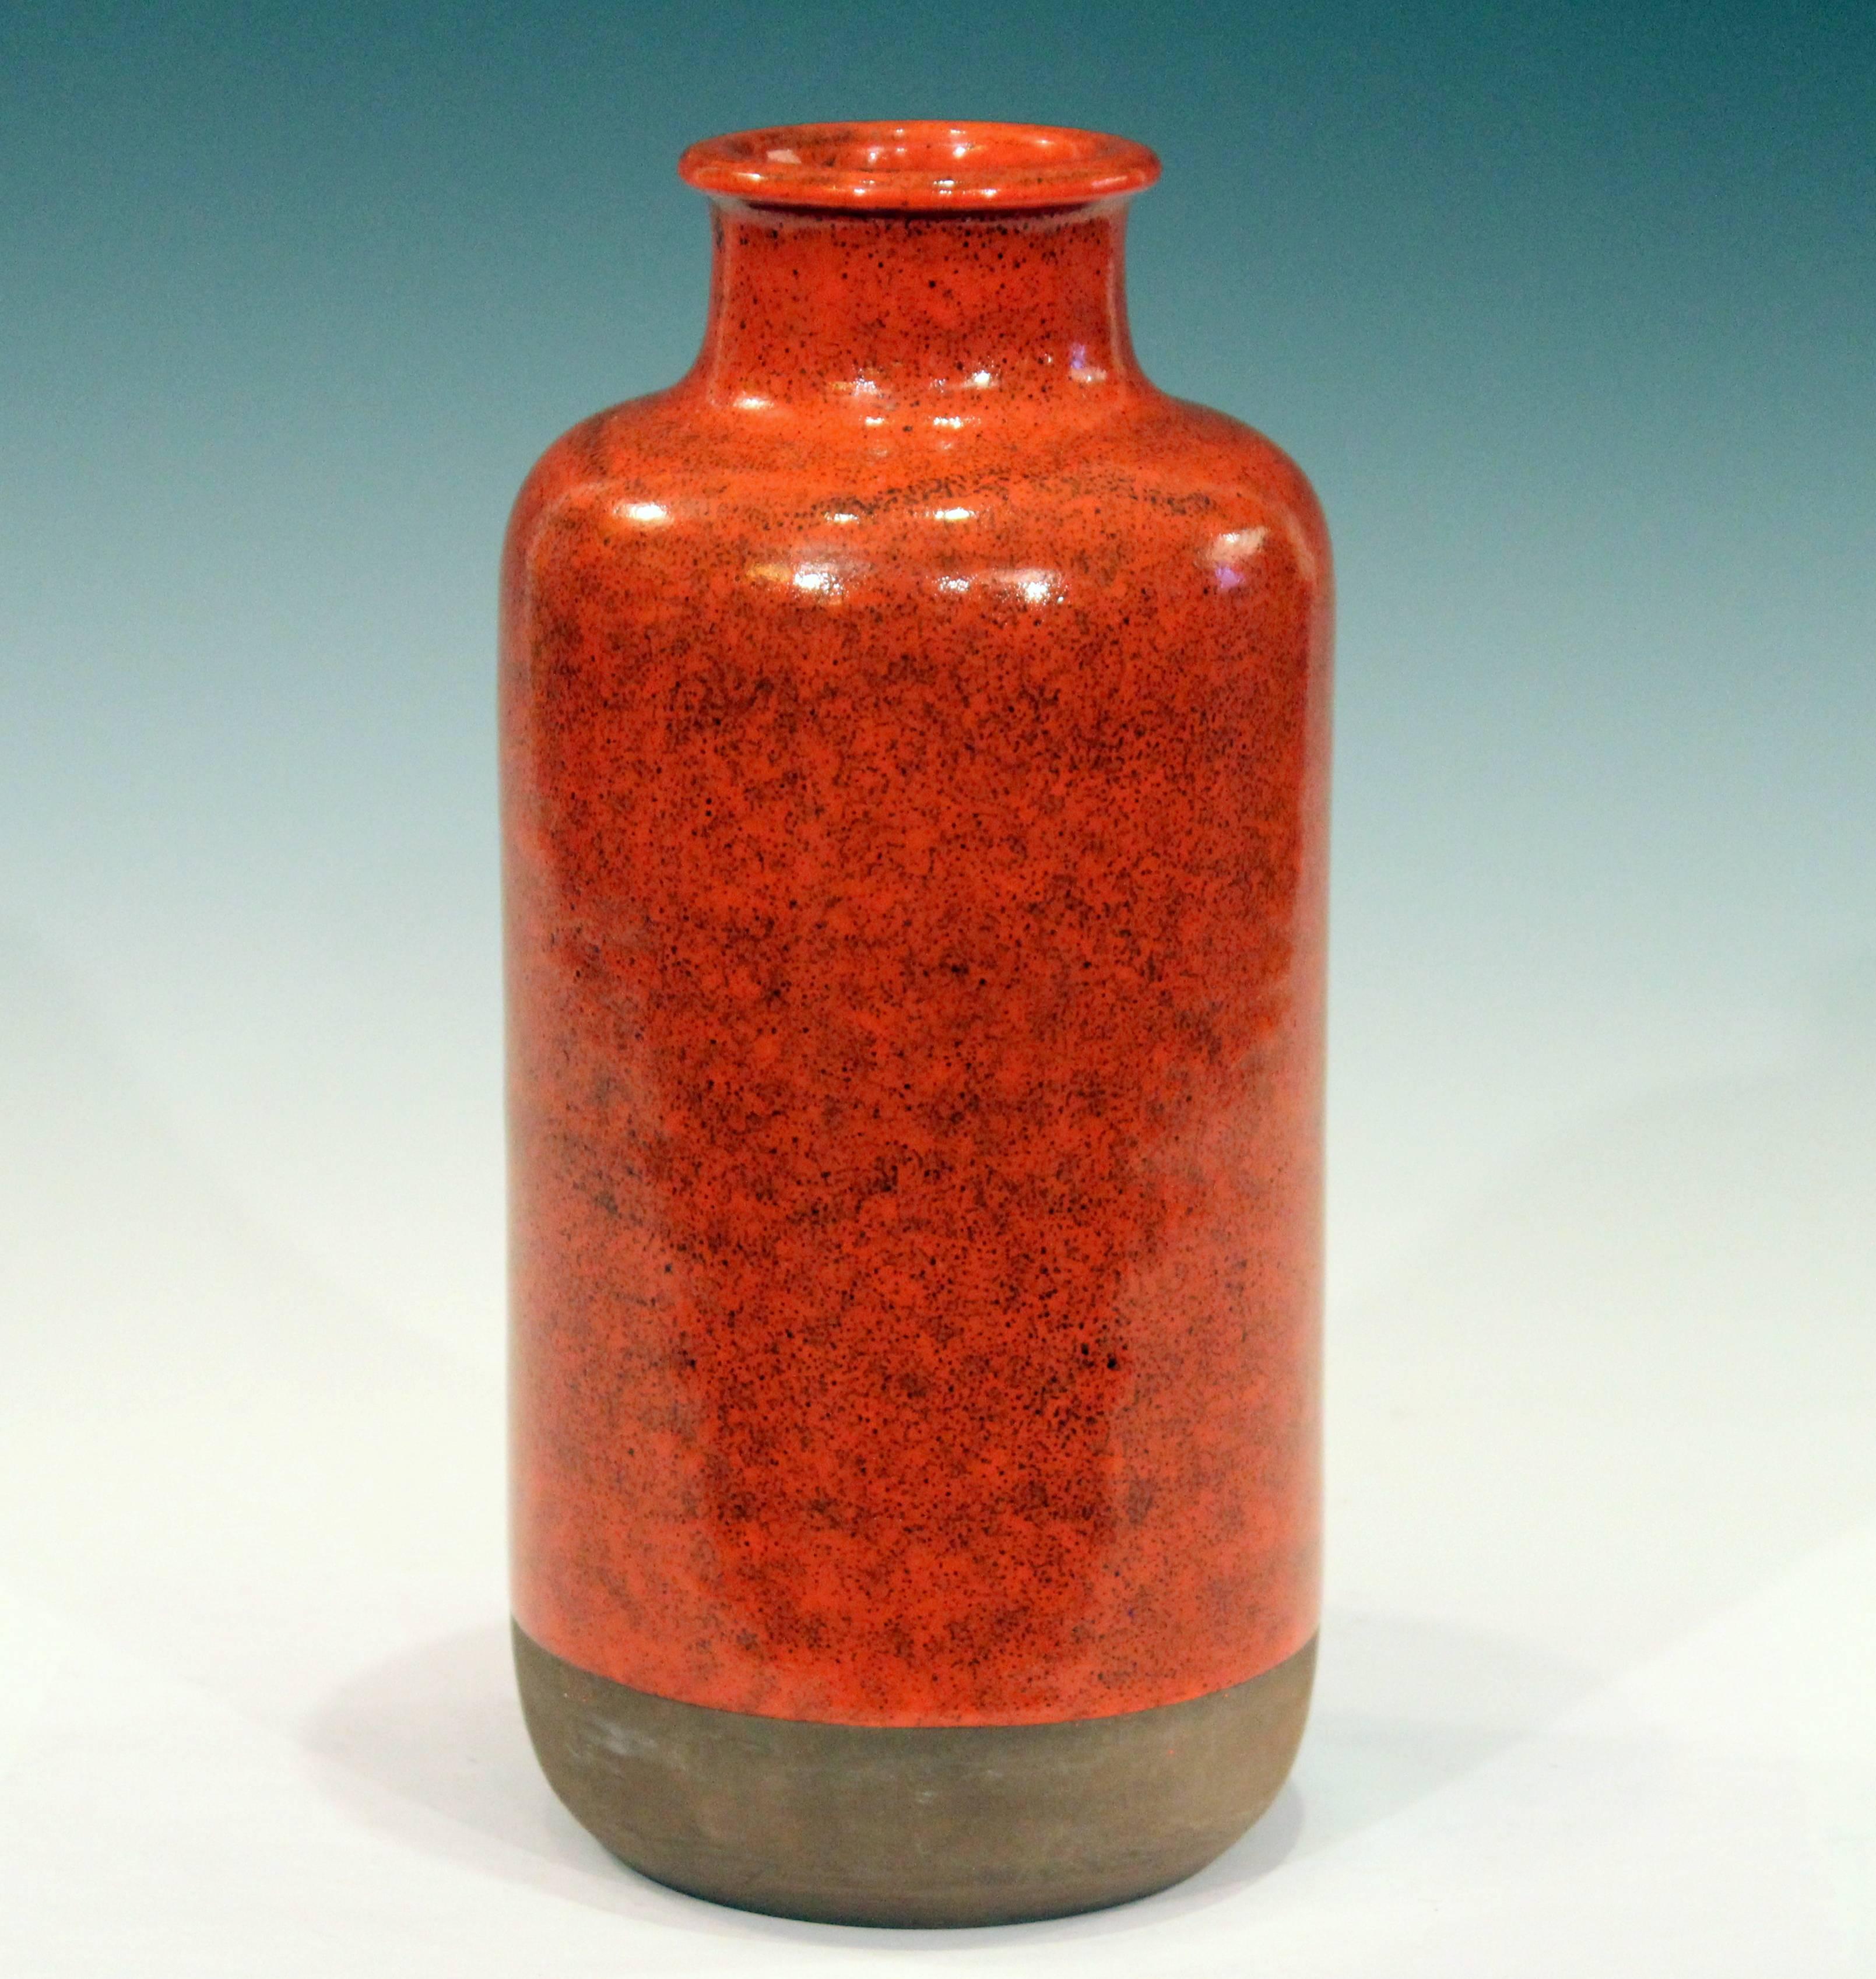 Vintage Bitossi in mottled orange / red glaze, circa early 1960s. Sophisticated, hand-turned and slightly tapered bottle form with rolled lip and hot glaze suspended just above the footrim. With the earlier red clay and original Bitossi inventory